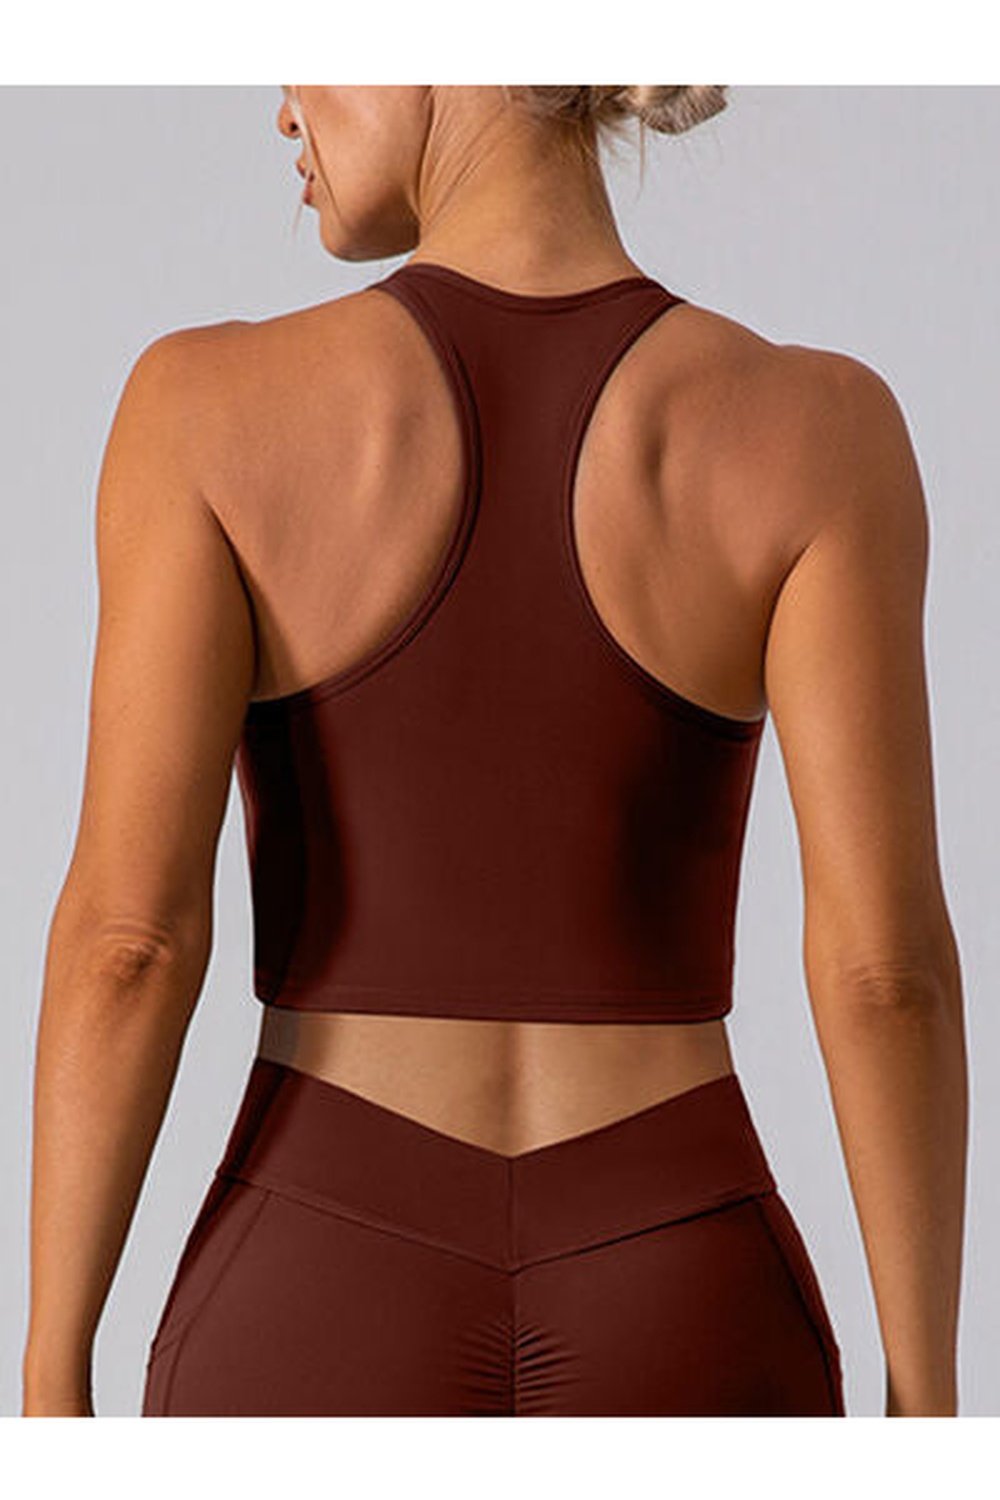 Square Neck Racerback Cropped Tank - Crop Tops & Tank Tops - FITGGINS